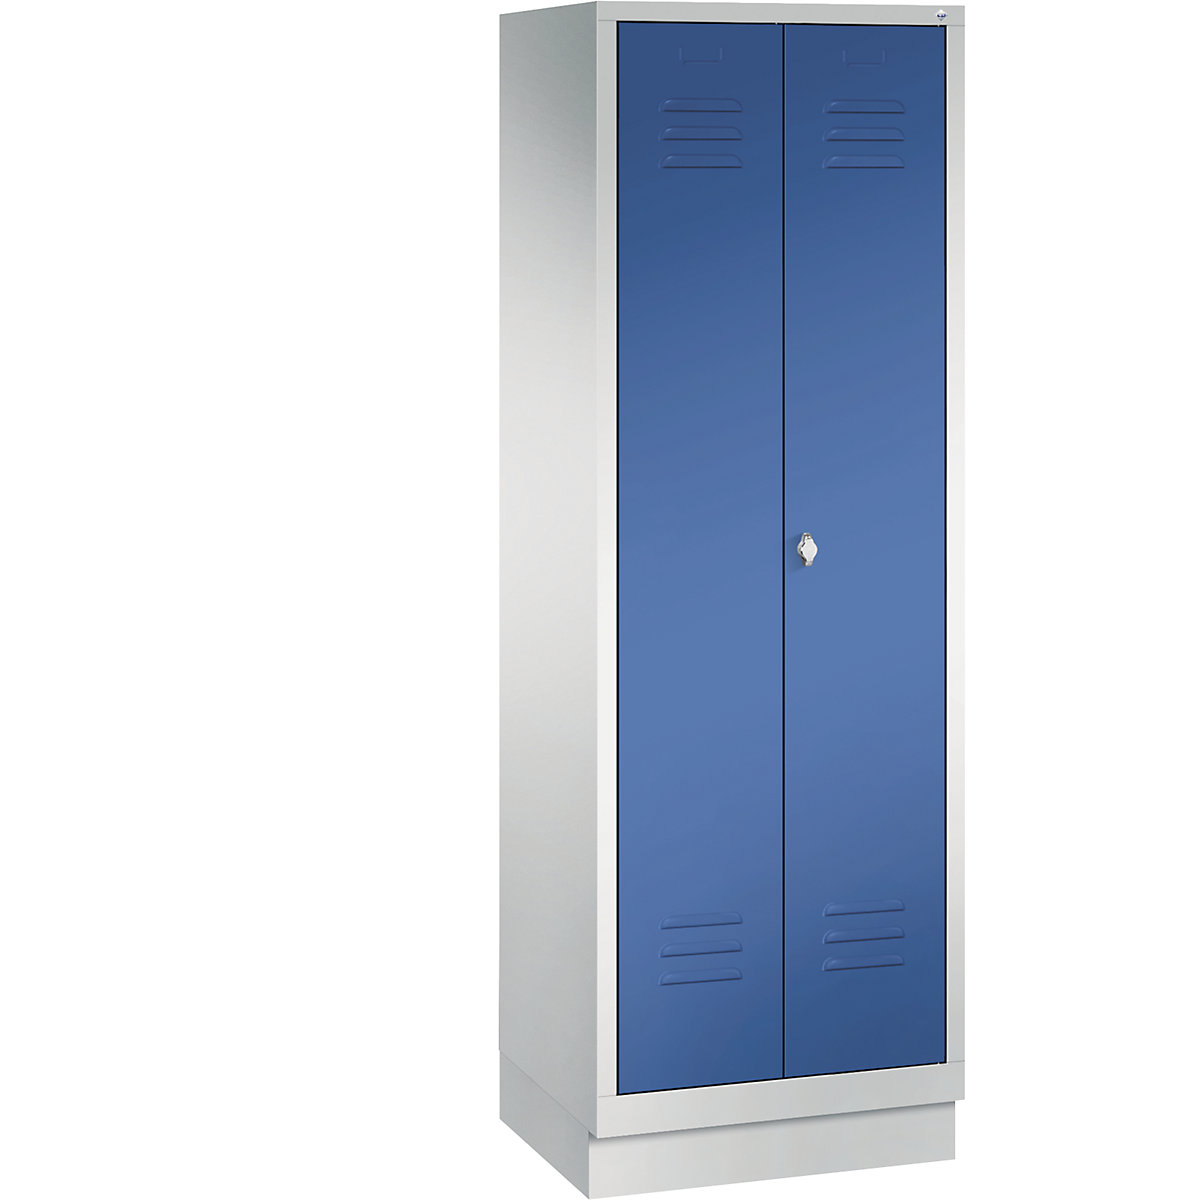 CLASSIC cloakroom locker with plinth, doors close in the middle – C+P, 2 compartments, compartment width 300 mm, light grey / gentian blue-8